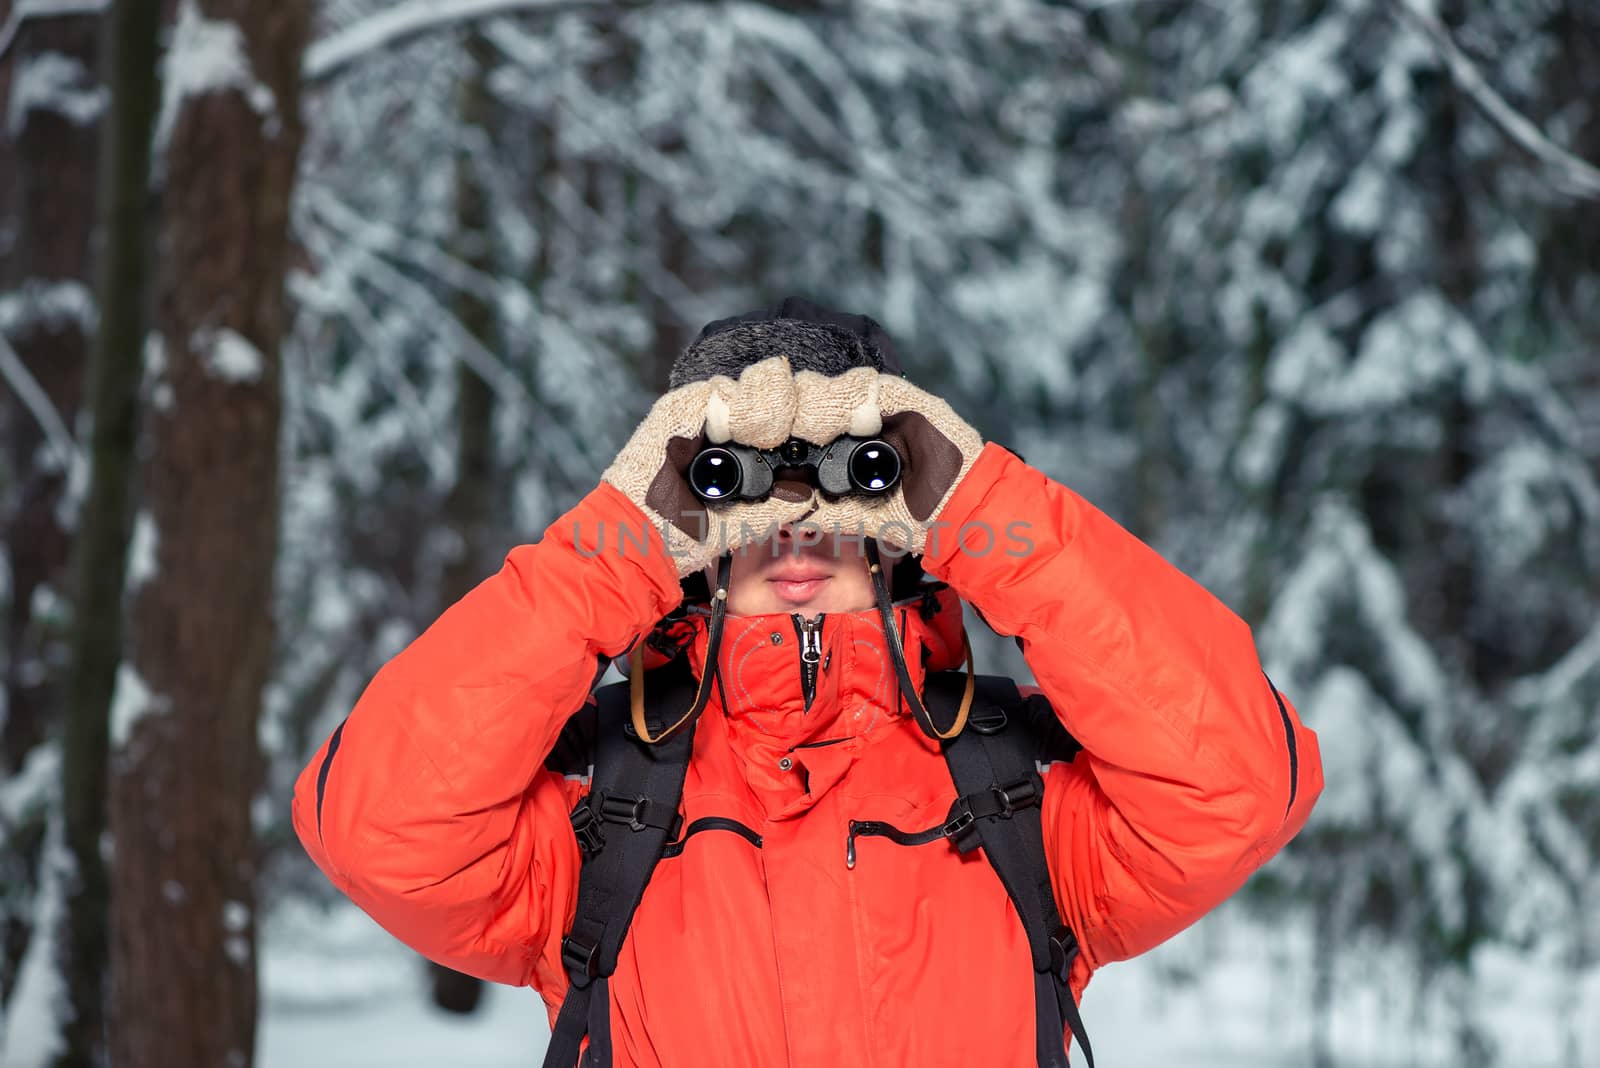 the tourist looks through binoculars, examines the road in the winter forest